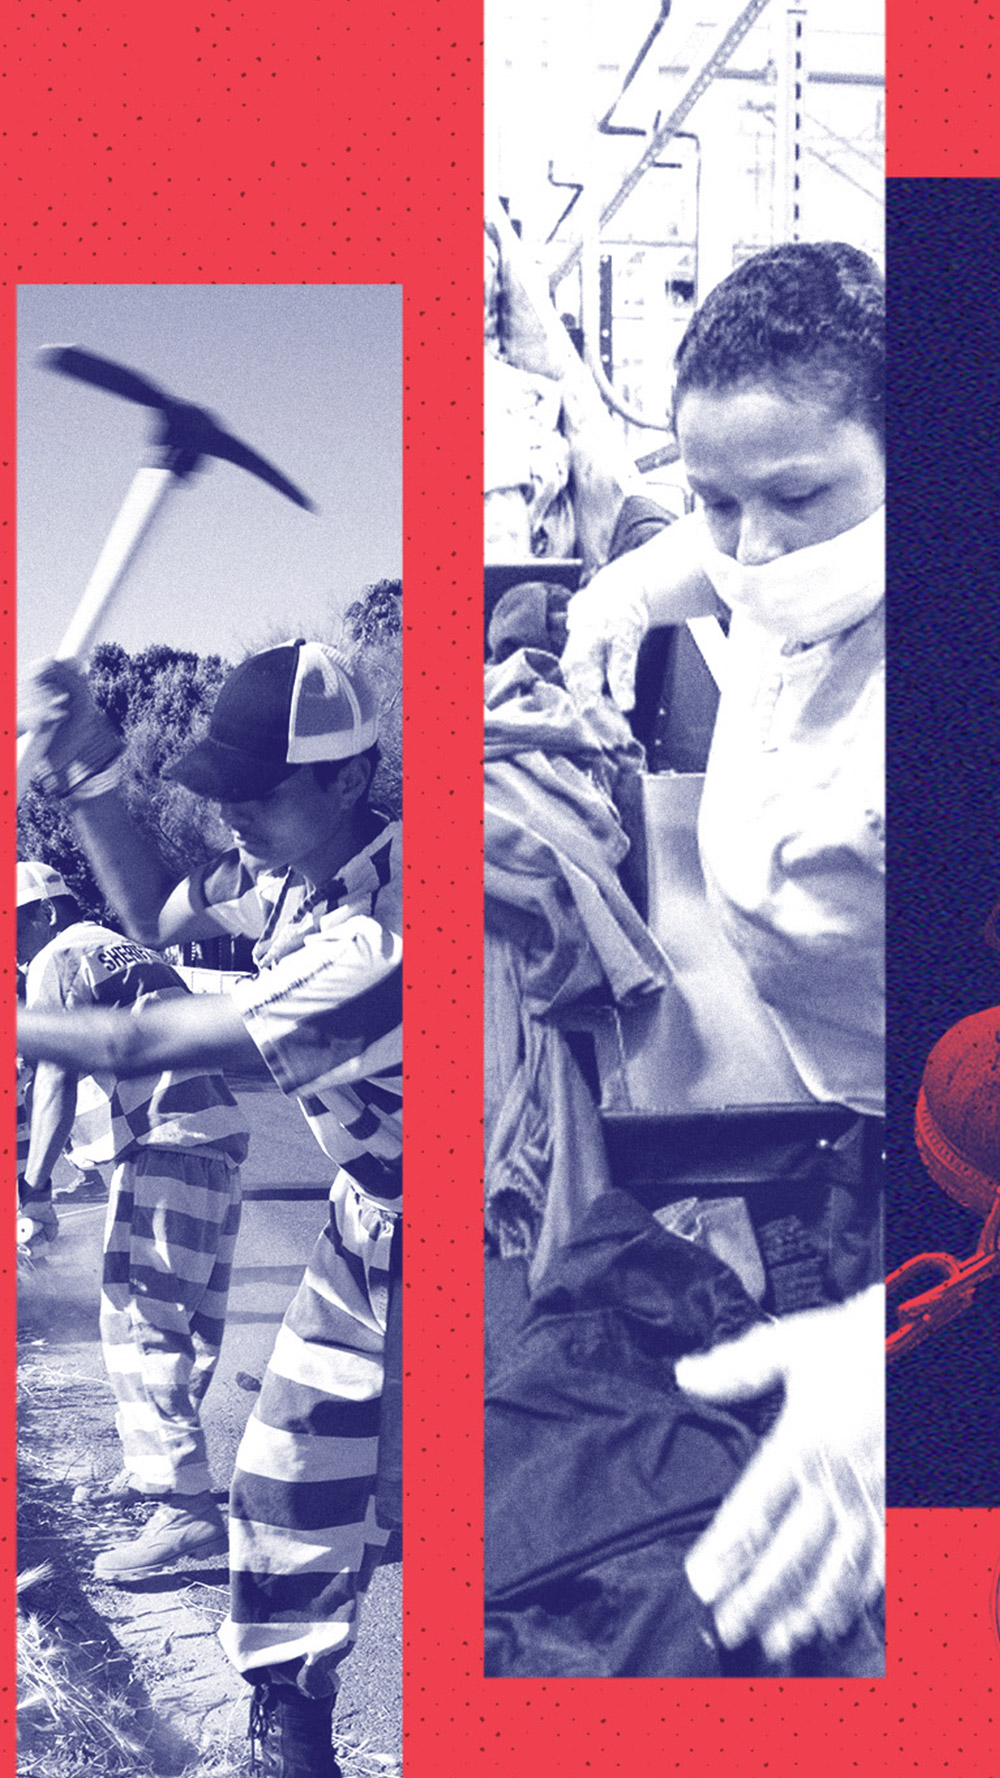 A collage of images depicting prison labor.